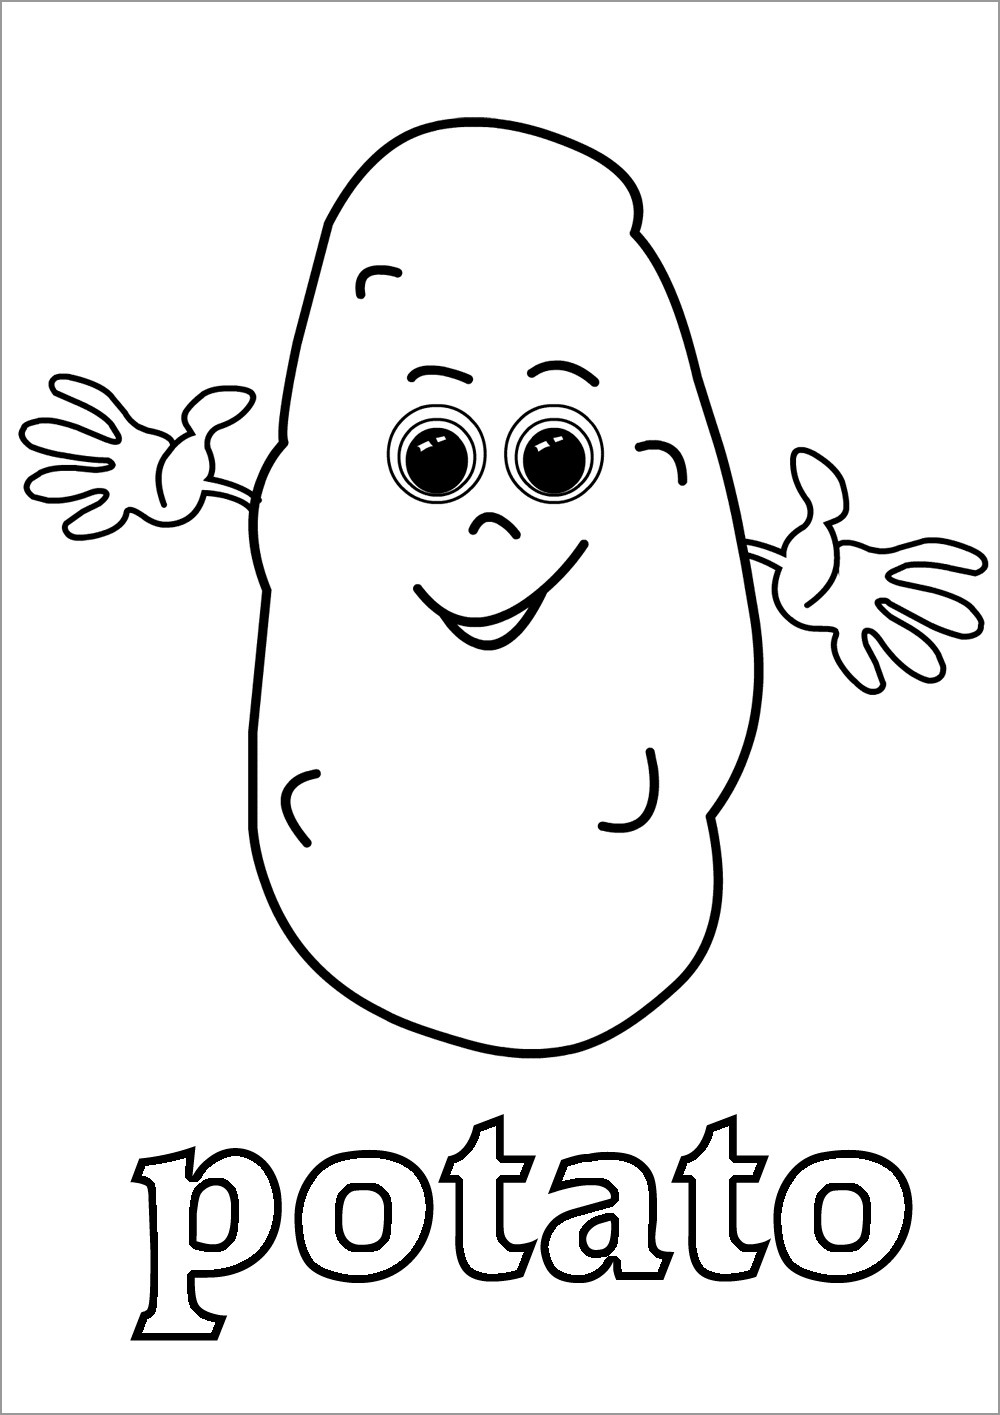 Potatoes Coloring Pages - ColoringBay